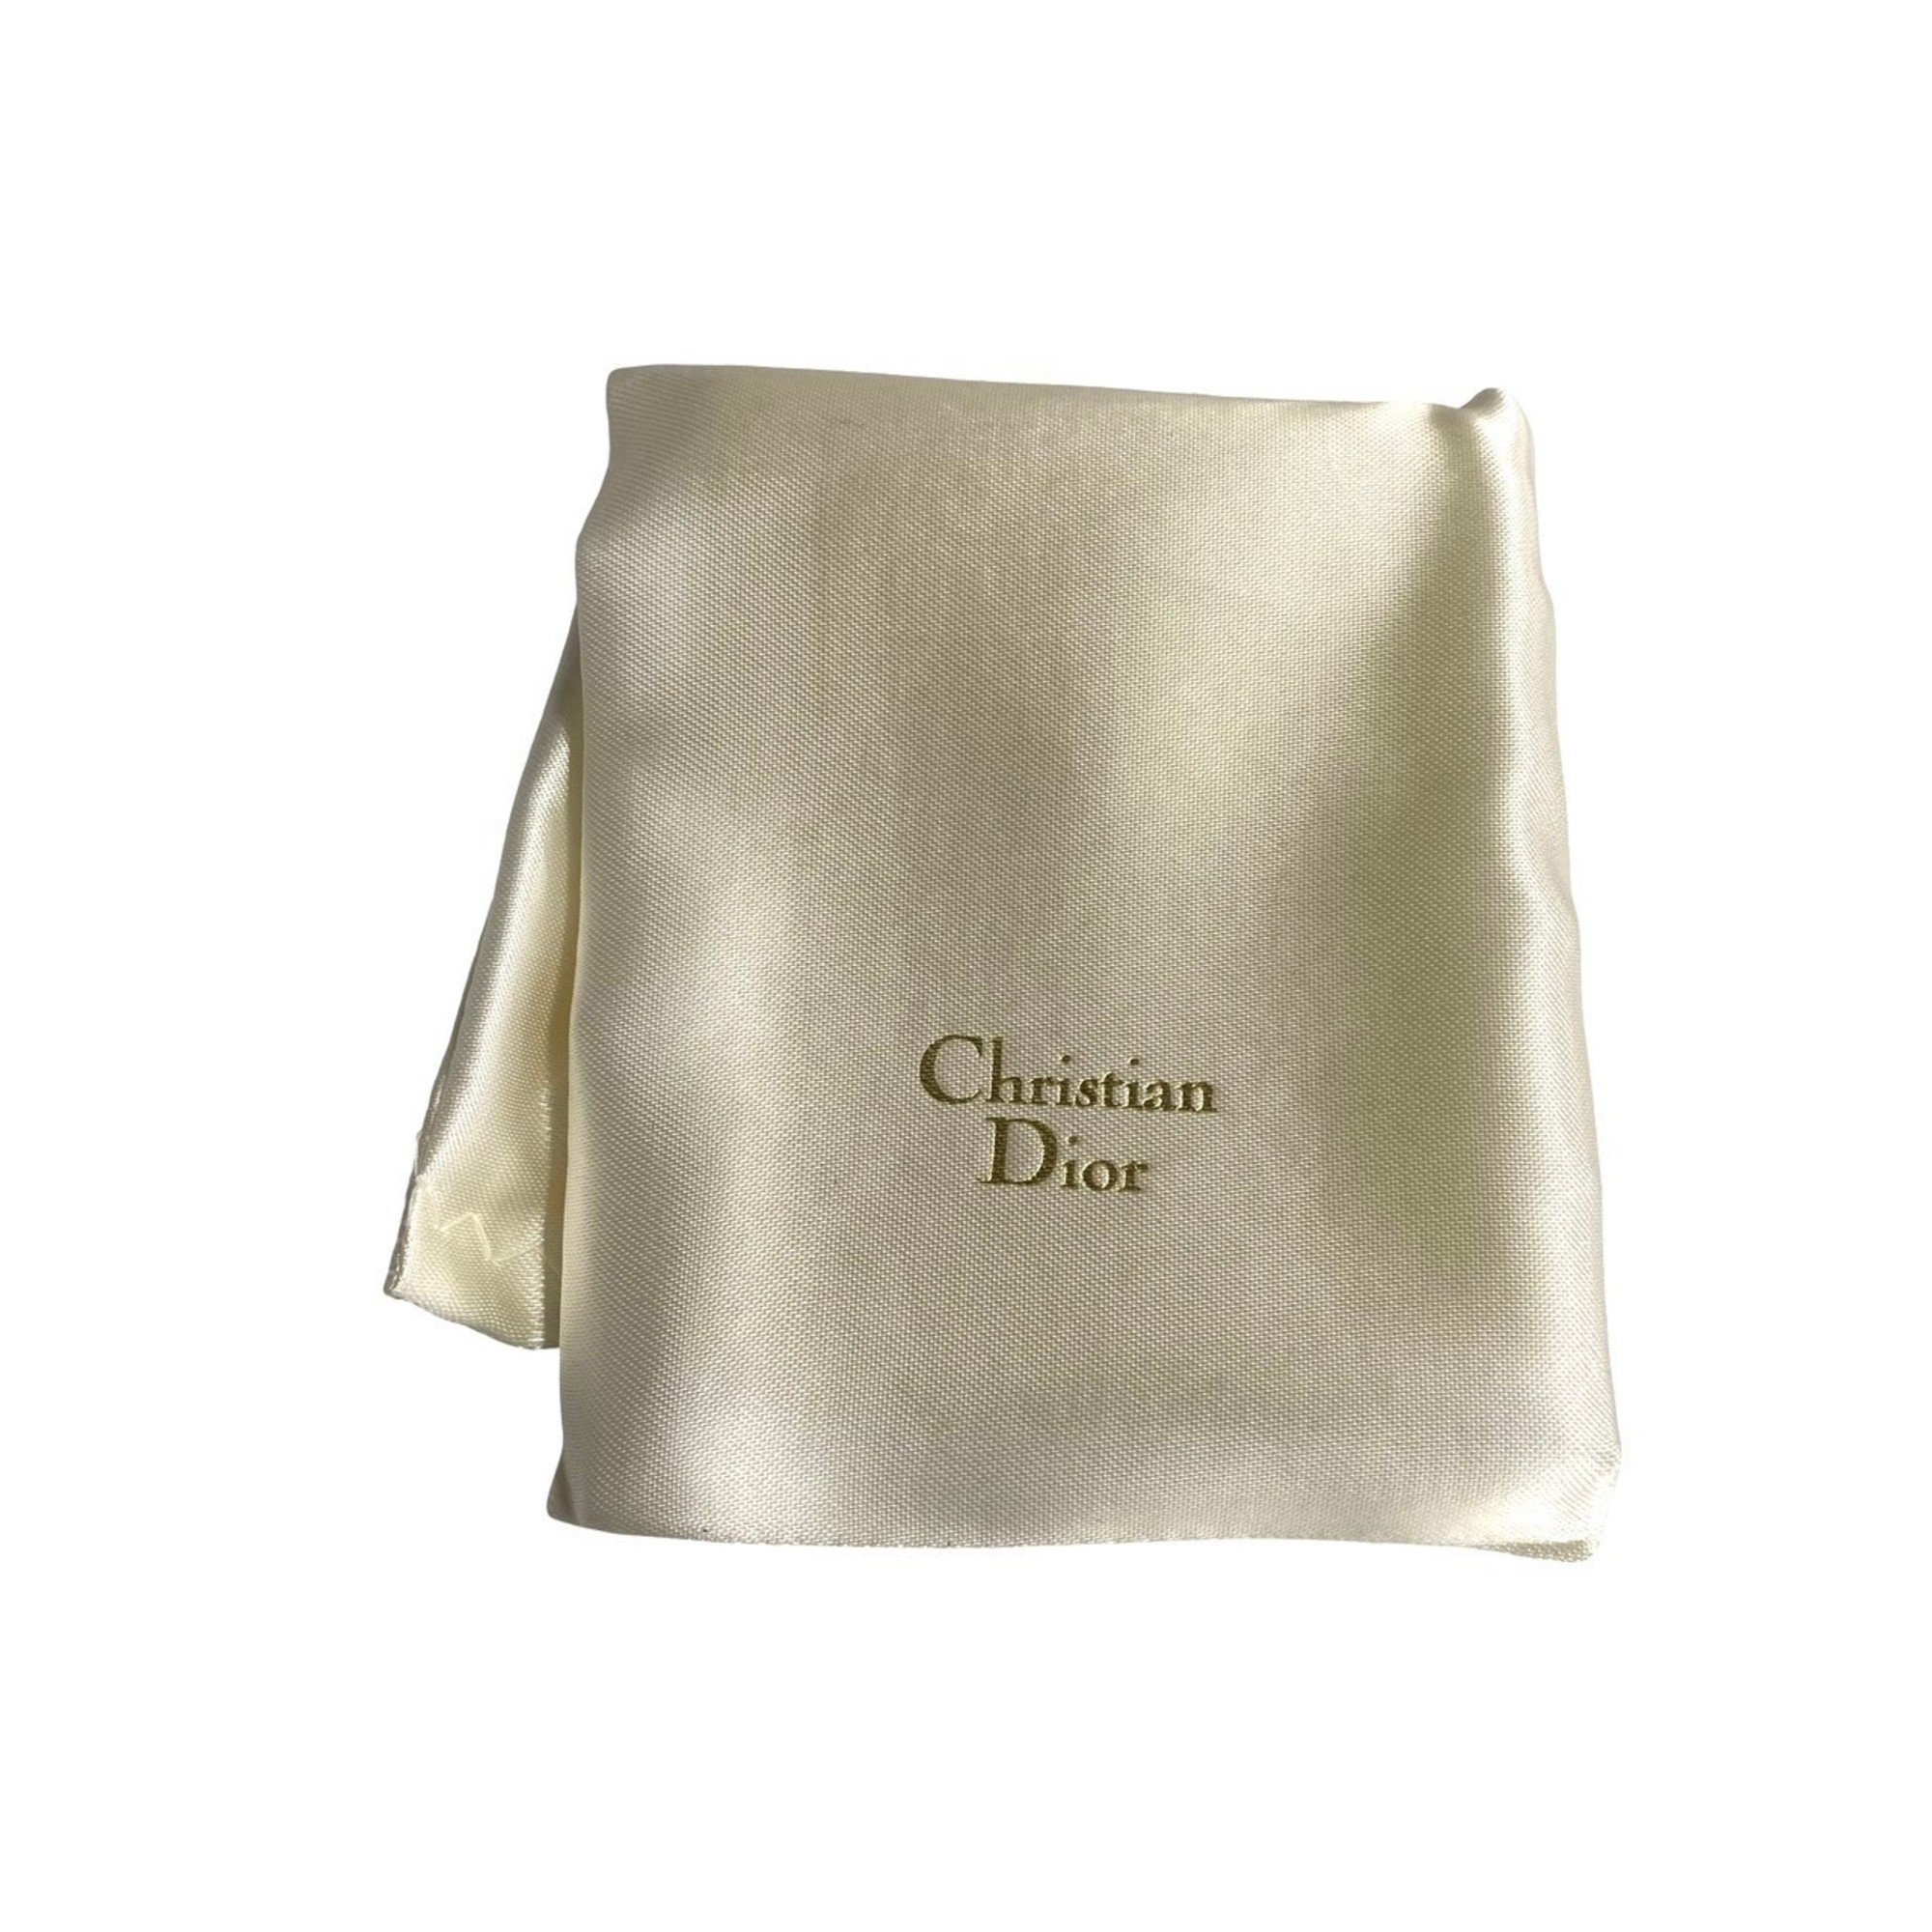 Christian Dior CD motif chain necklace pendant gold 79324